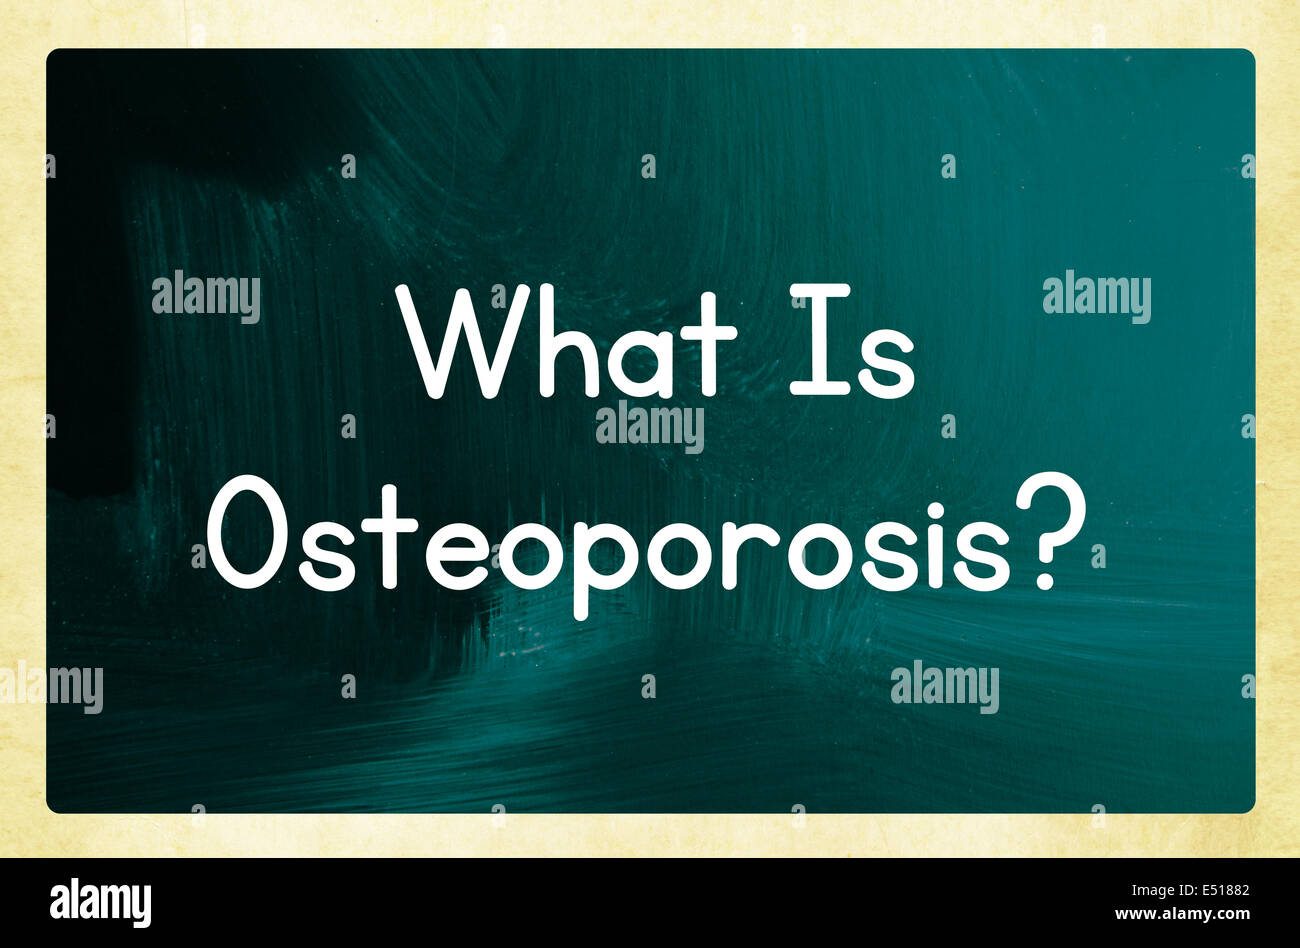 what is osteoporosis? Stock Photo